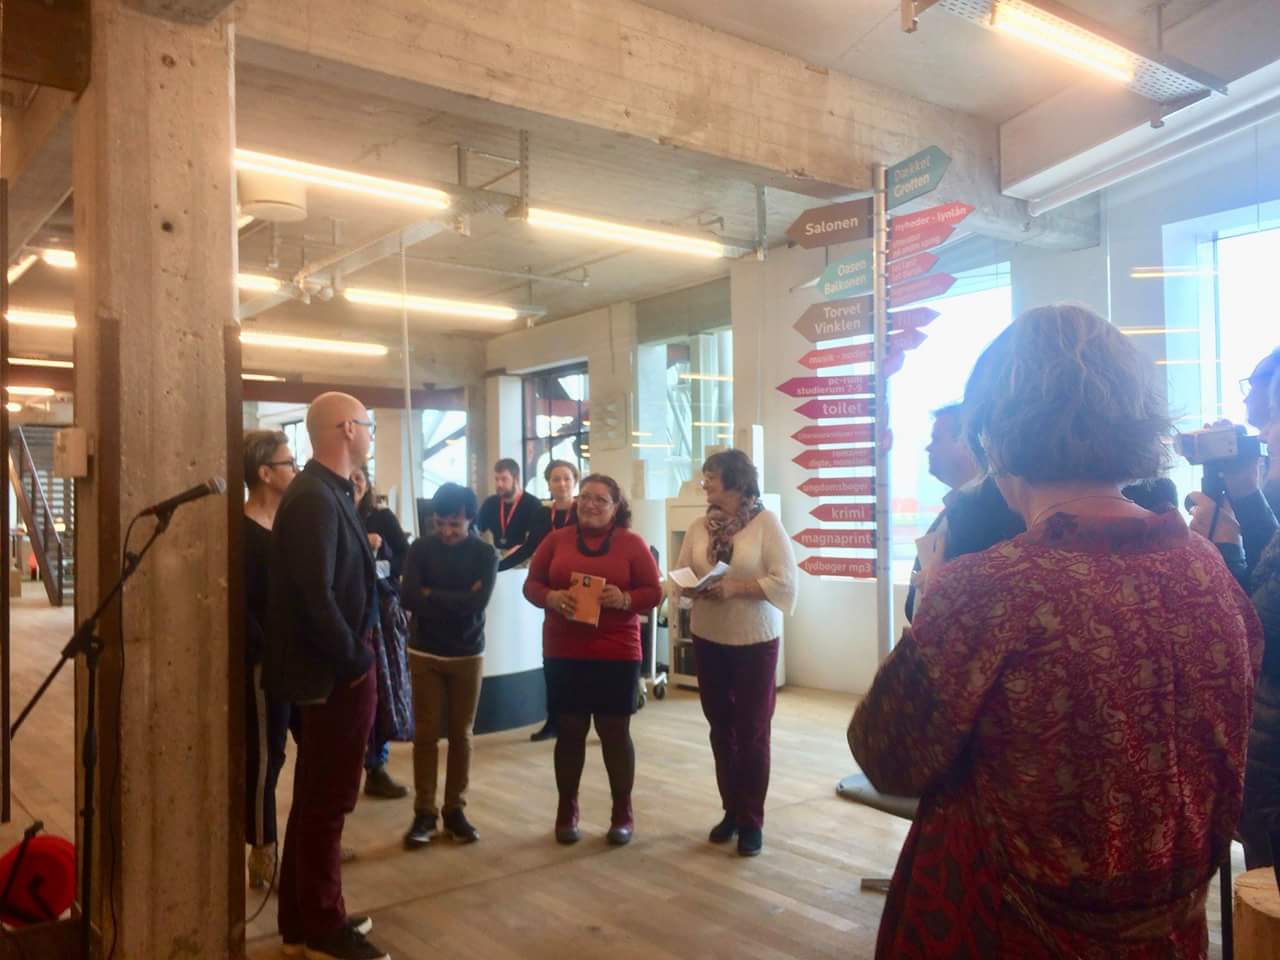 Opening of the exhibition Babette's feast at Helsingør public library, Kulturværftet 4 October 2018, with readings by Amani Lazar and Sozanne Schytt.  Photo. 